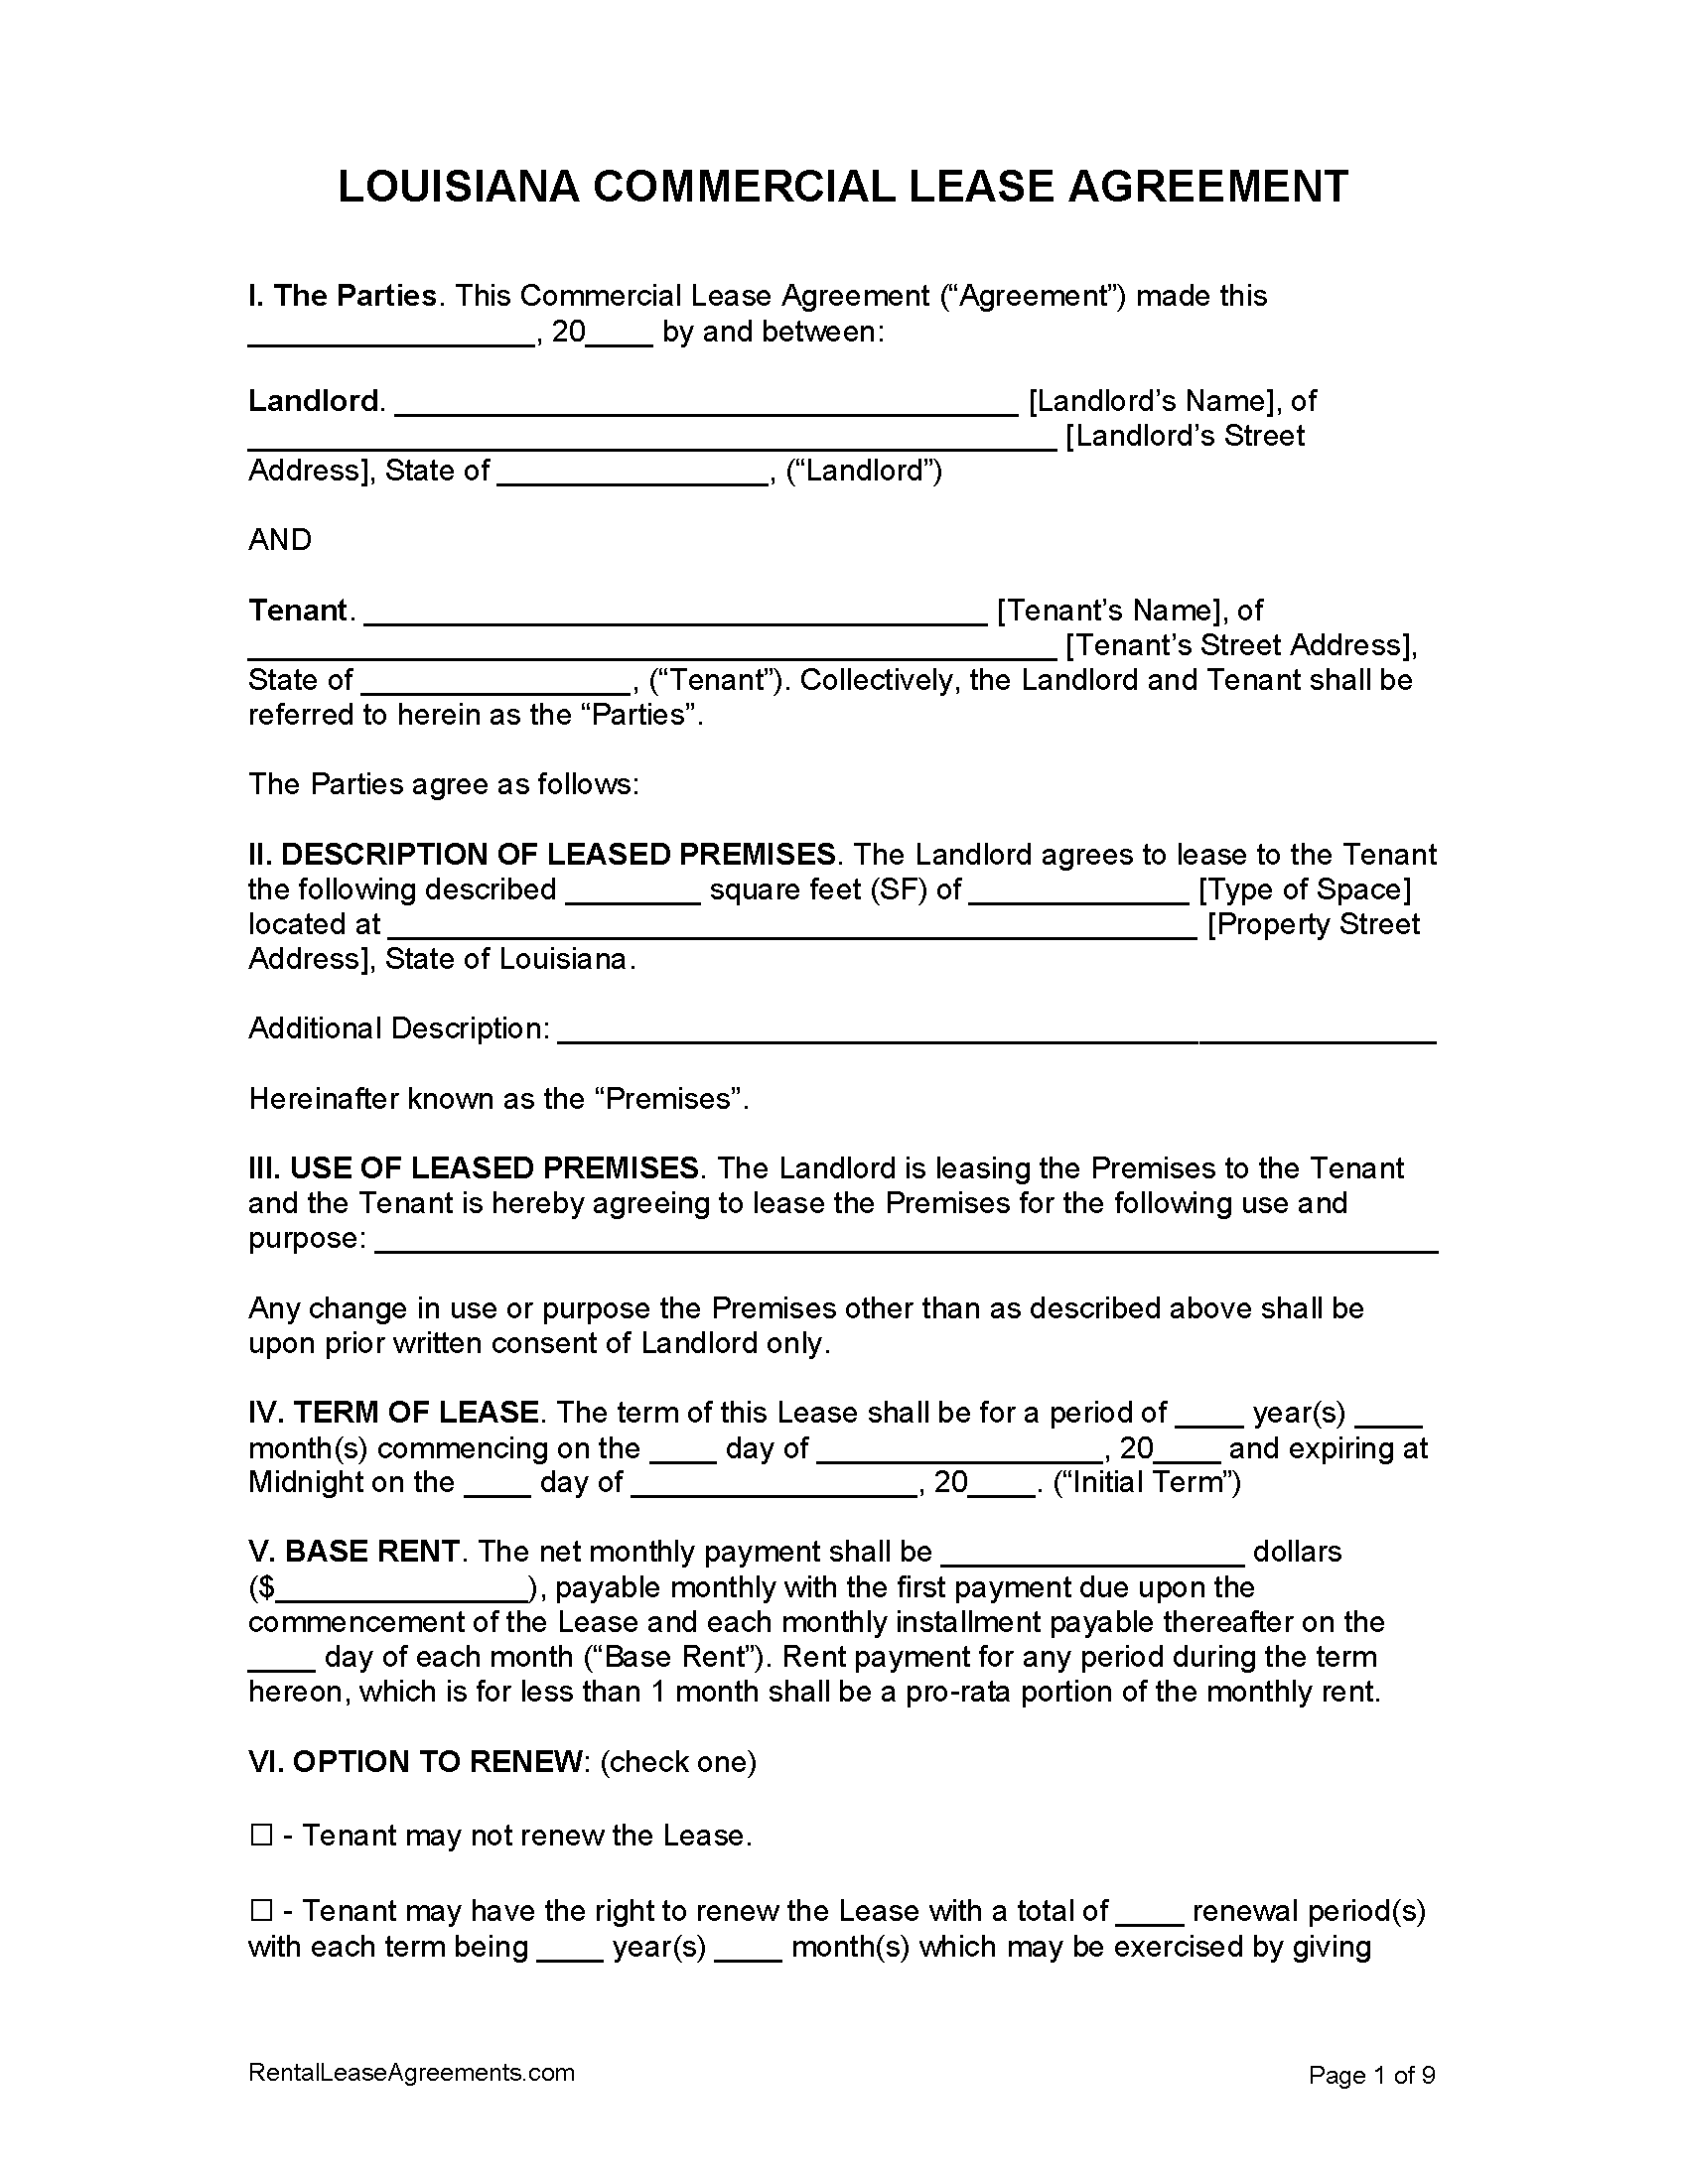 free louisiana commercial lease agreement pdf ms word